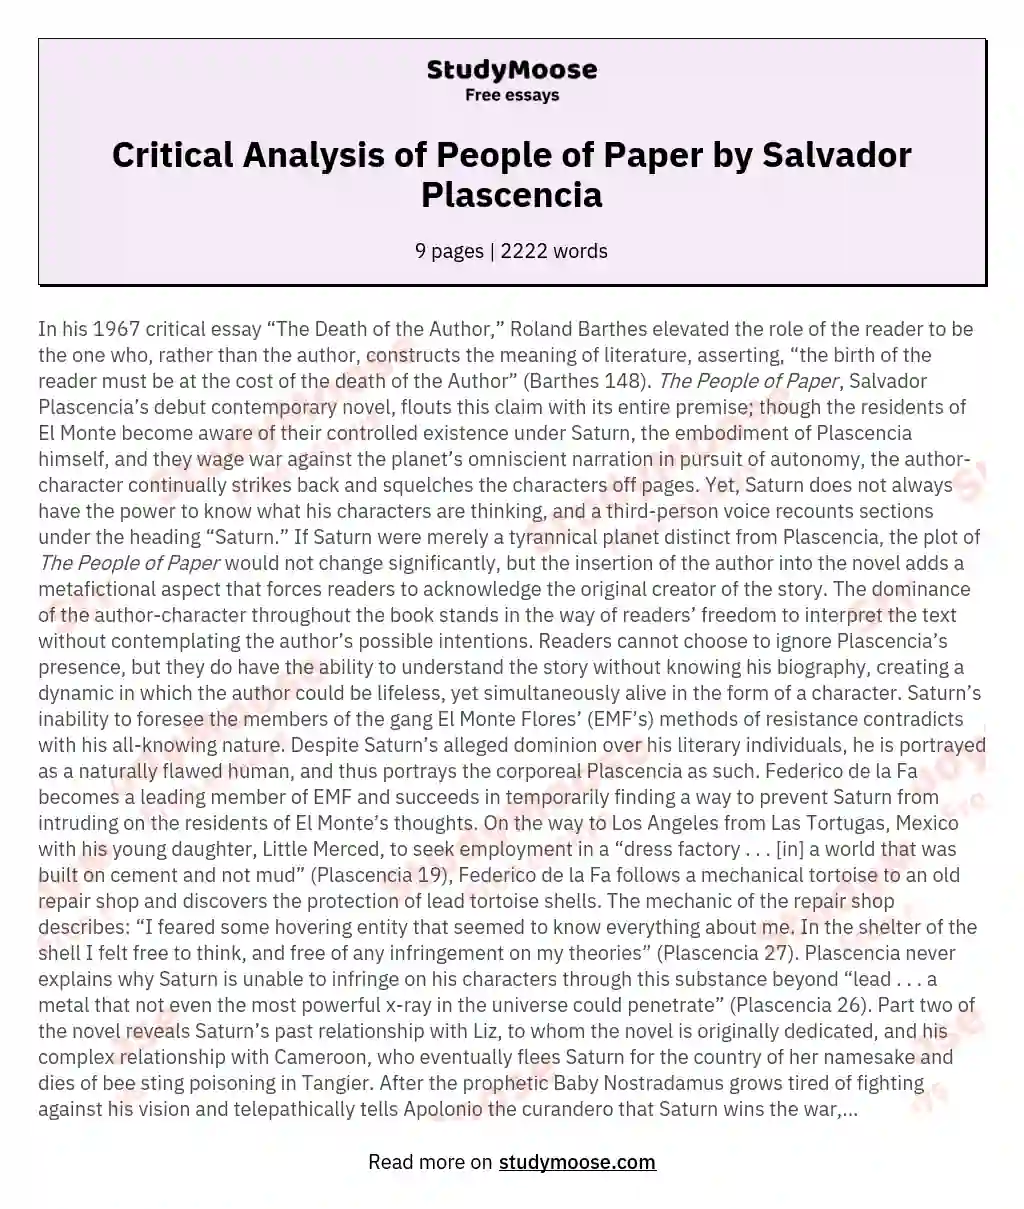 Critical Analysis of People of Paper by Salvador Plascencia essay